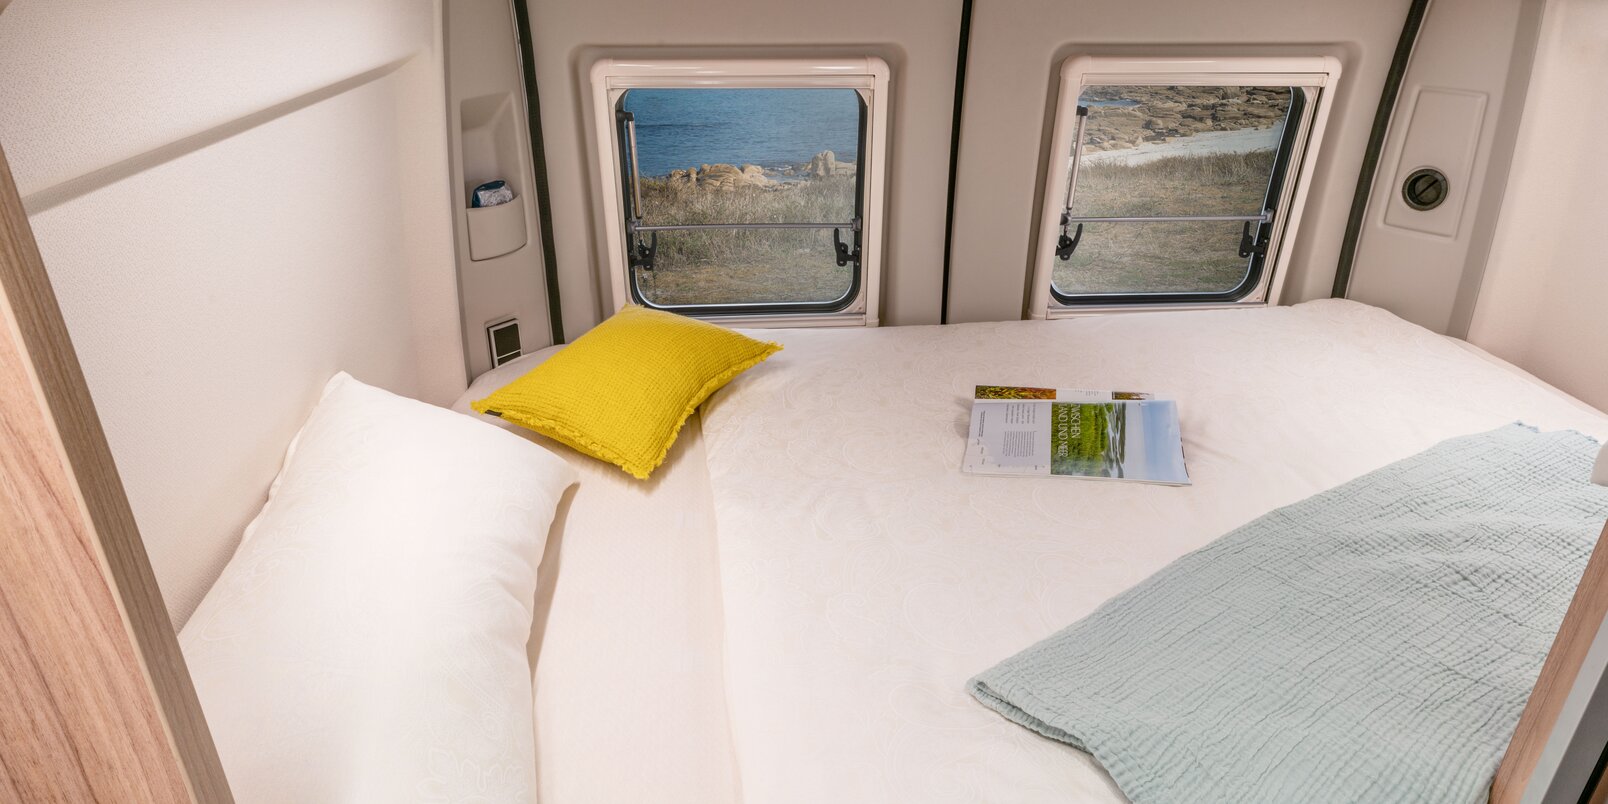 Sleeping area in the rear of the HYMER Camper Van: white bed linen, yellow pillow, blanket, magazine; Rear window